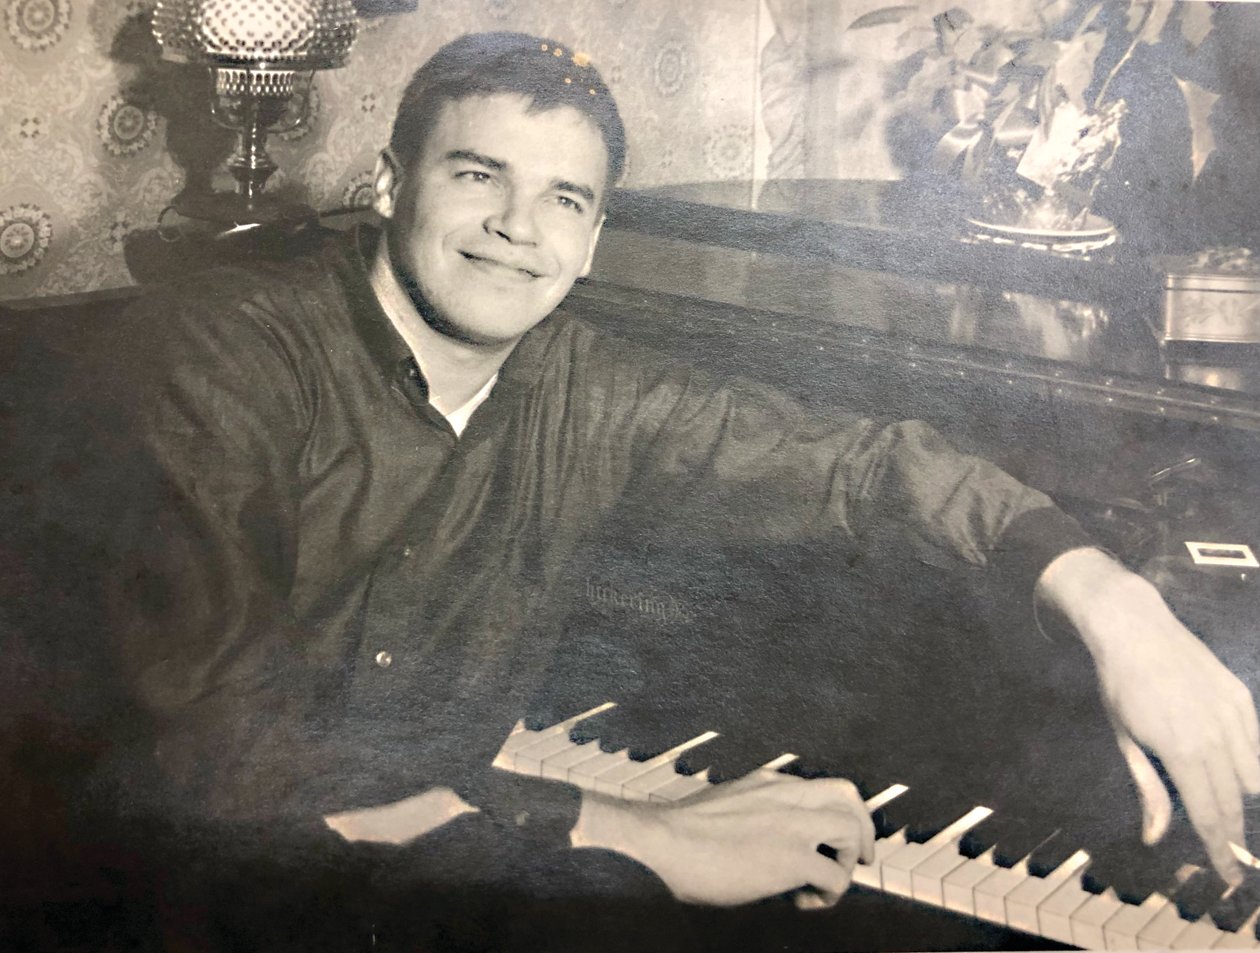 Lentz as a 20-year-old, relaxing at a friend’s house.